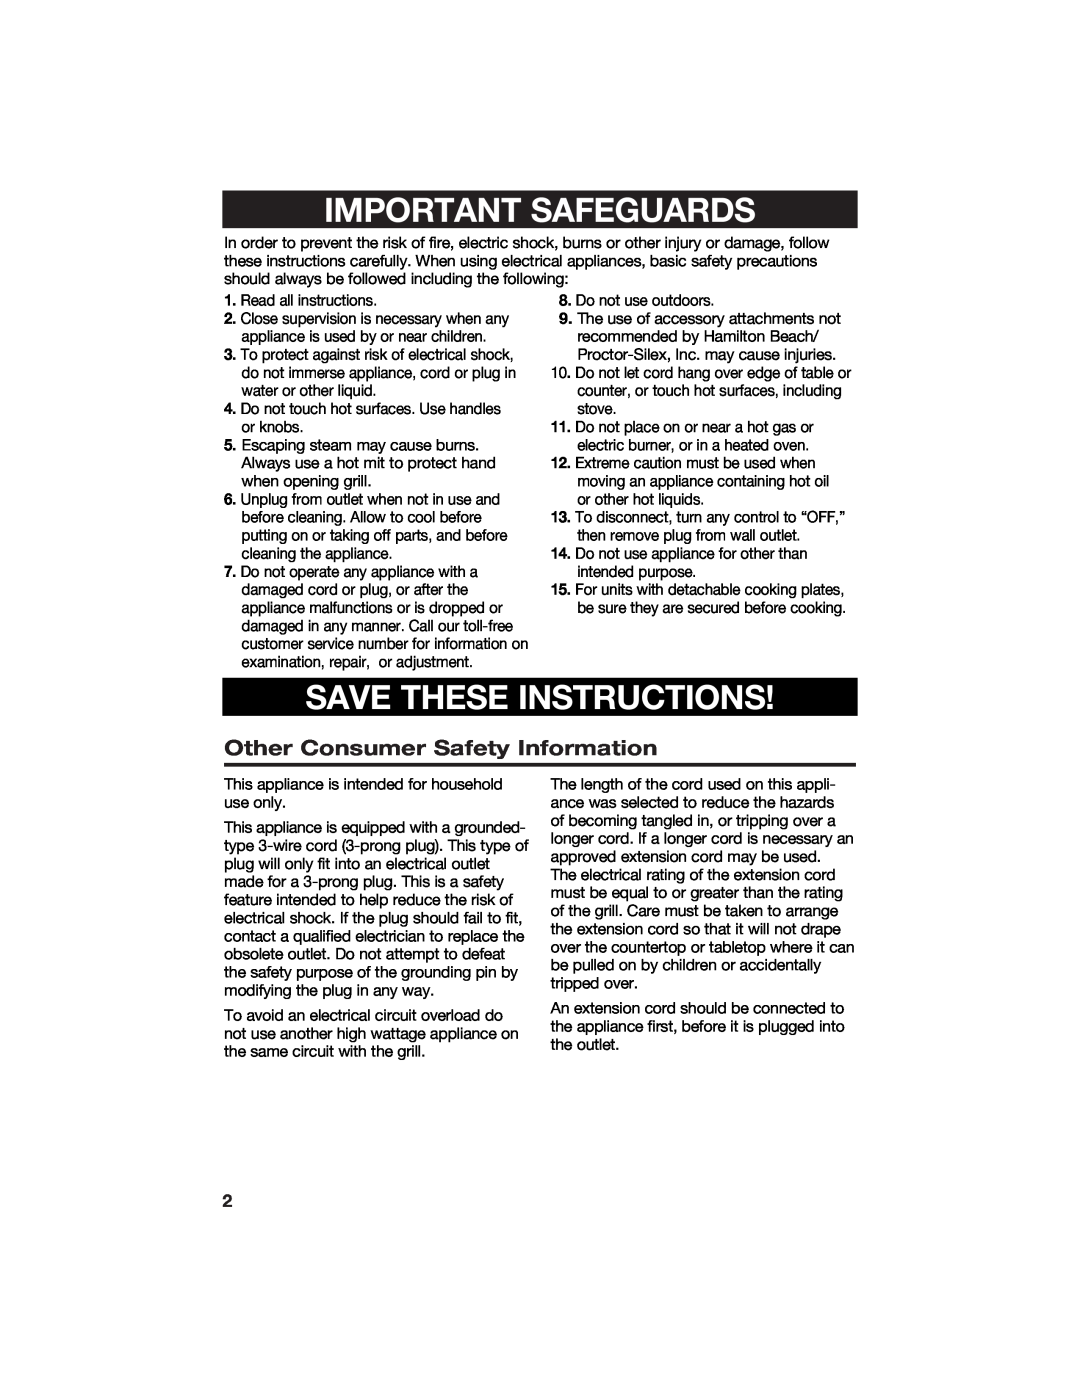 Hamilton Beach 840125300 manual Important Safeguards, Save These Instructions, Other Consumer Safety Information 